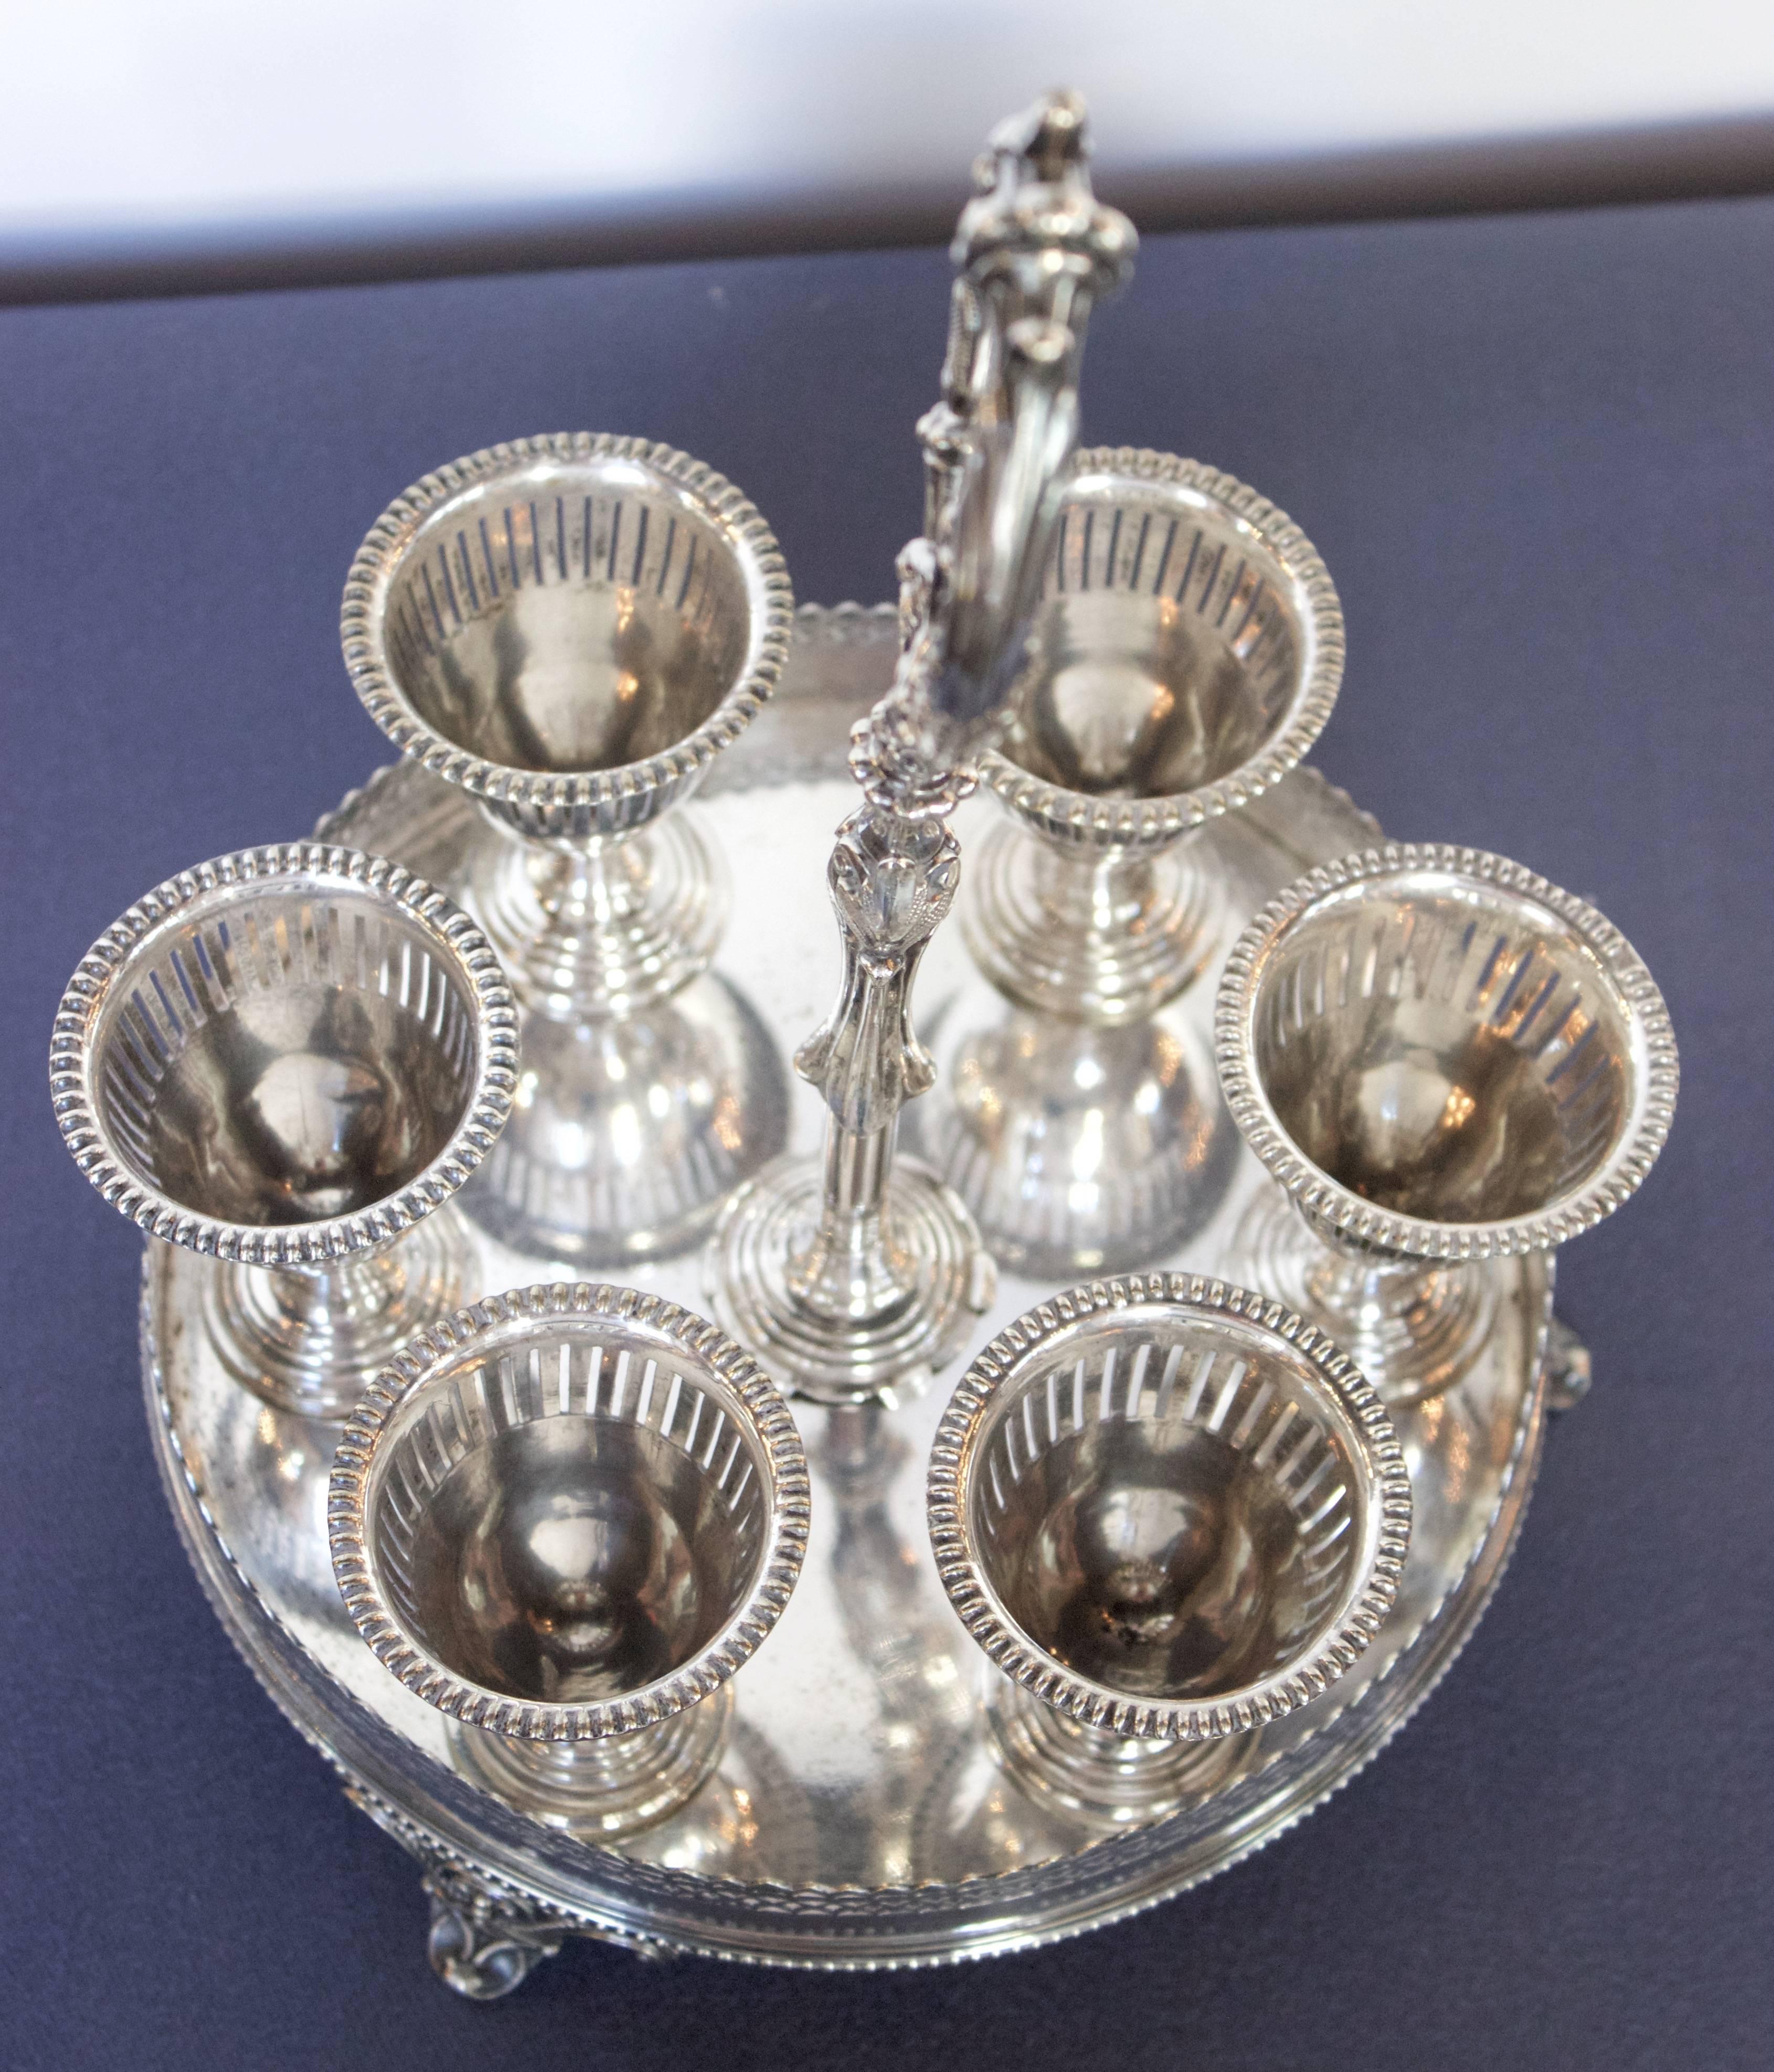 Beautifully silver plated set of six Eggs cup on a circular holder. All makers marks under the tray for William Hutton Company which became Silversmith and platters in Sheffield in 1832.